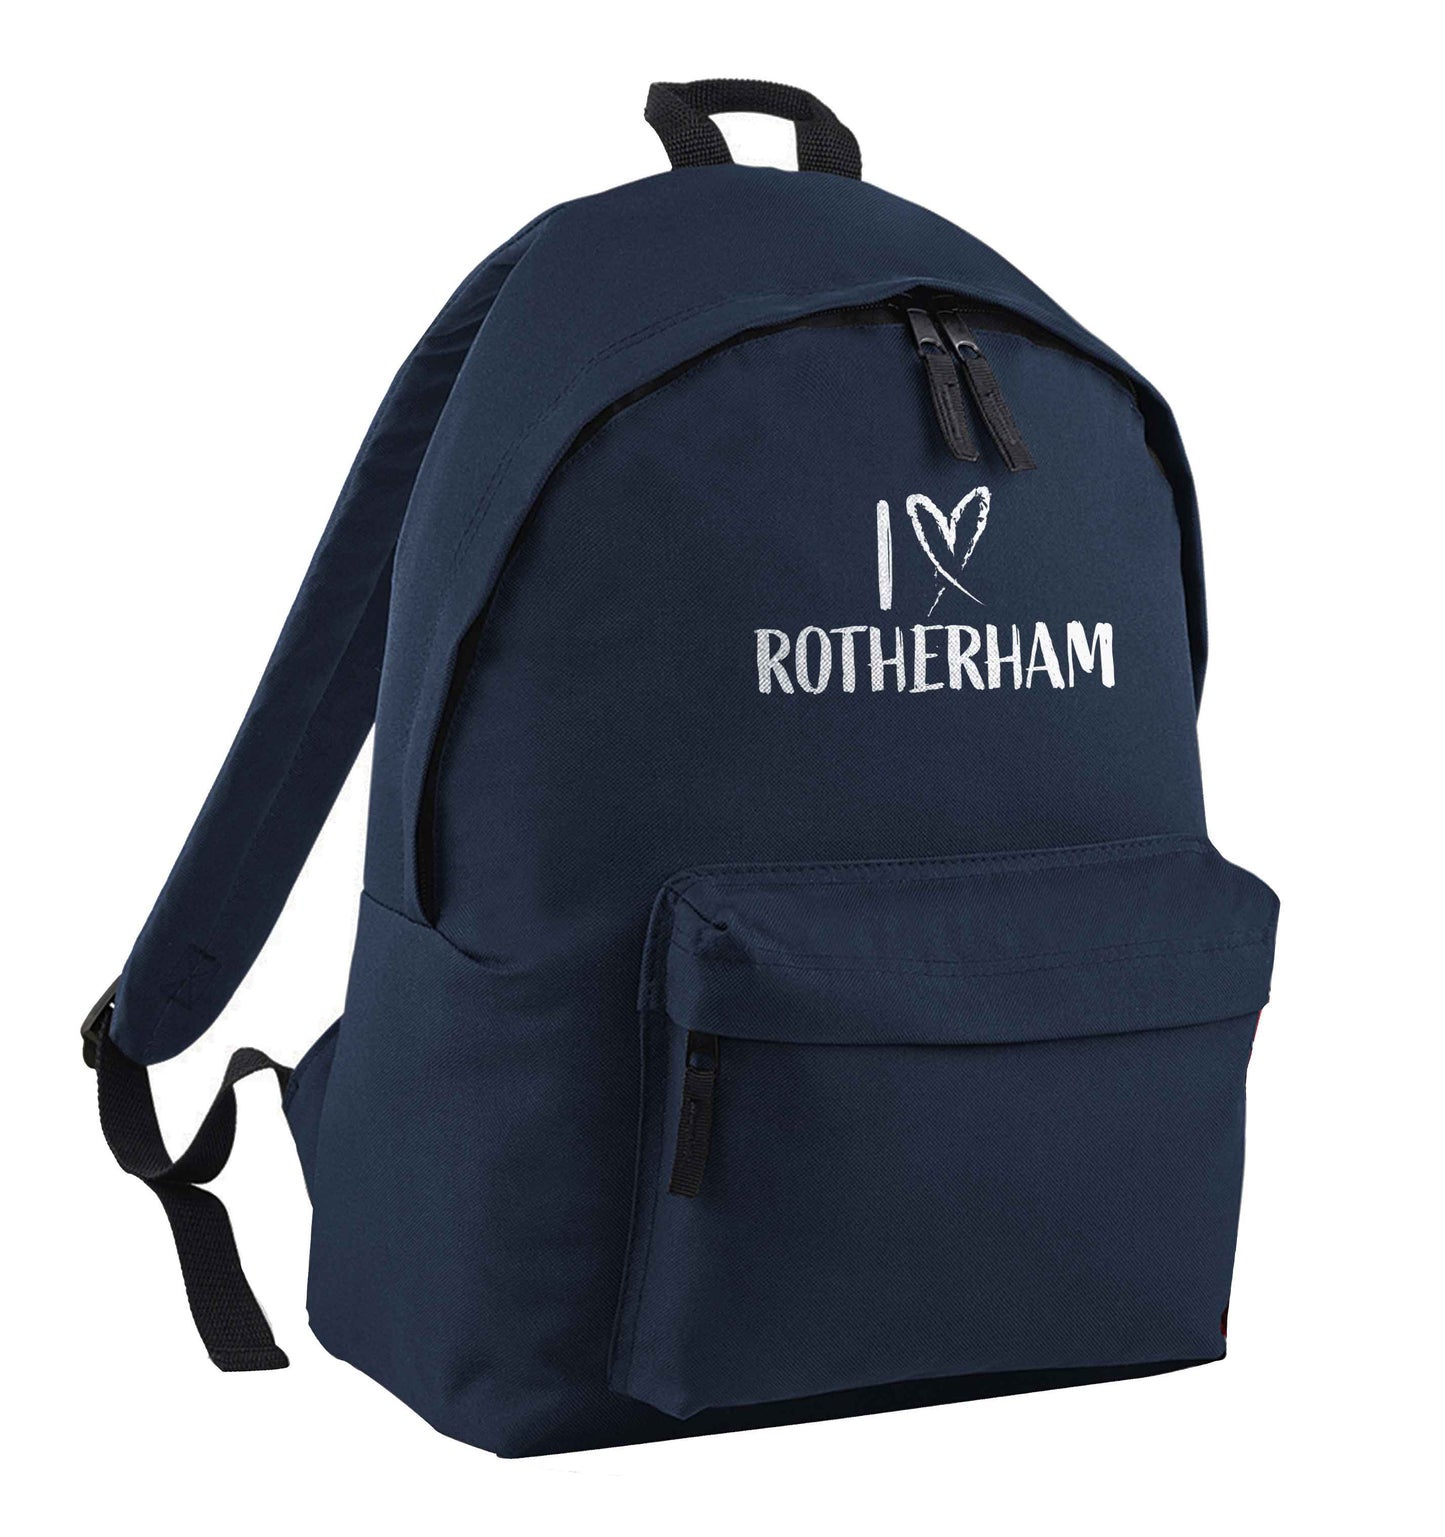 I love Rotherham navy adults backpack